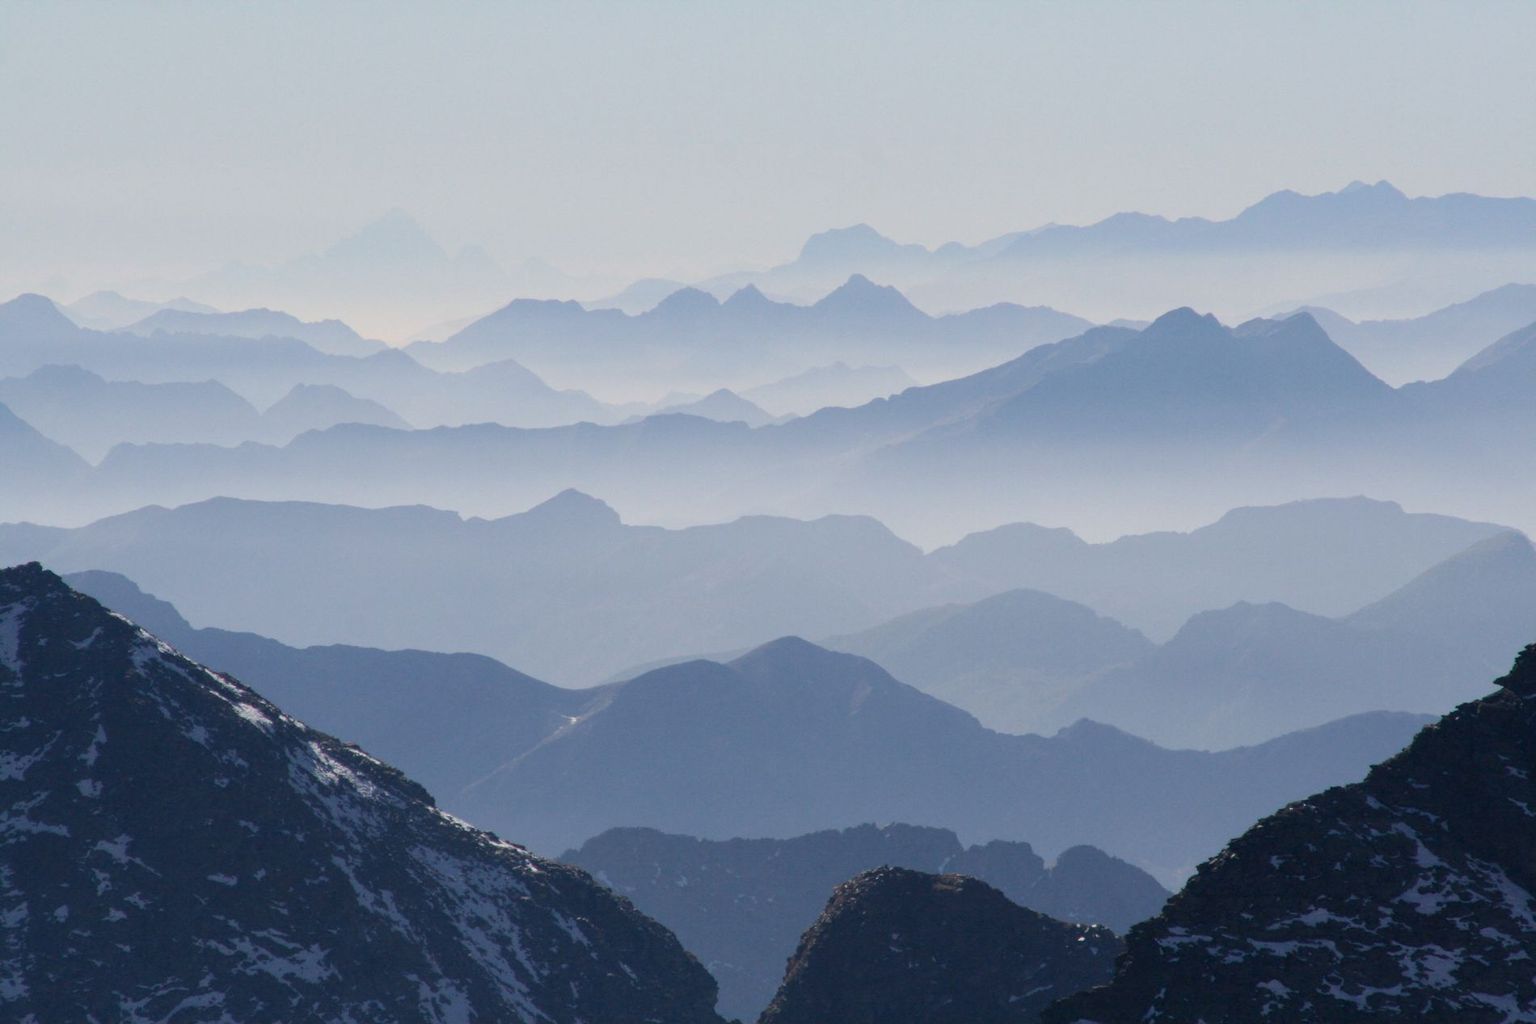 View towards the Southern Alps from Pizzo Forno / Alpe Sponda (TI)